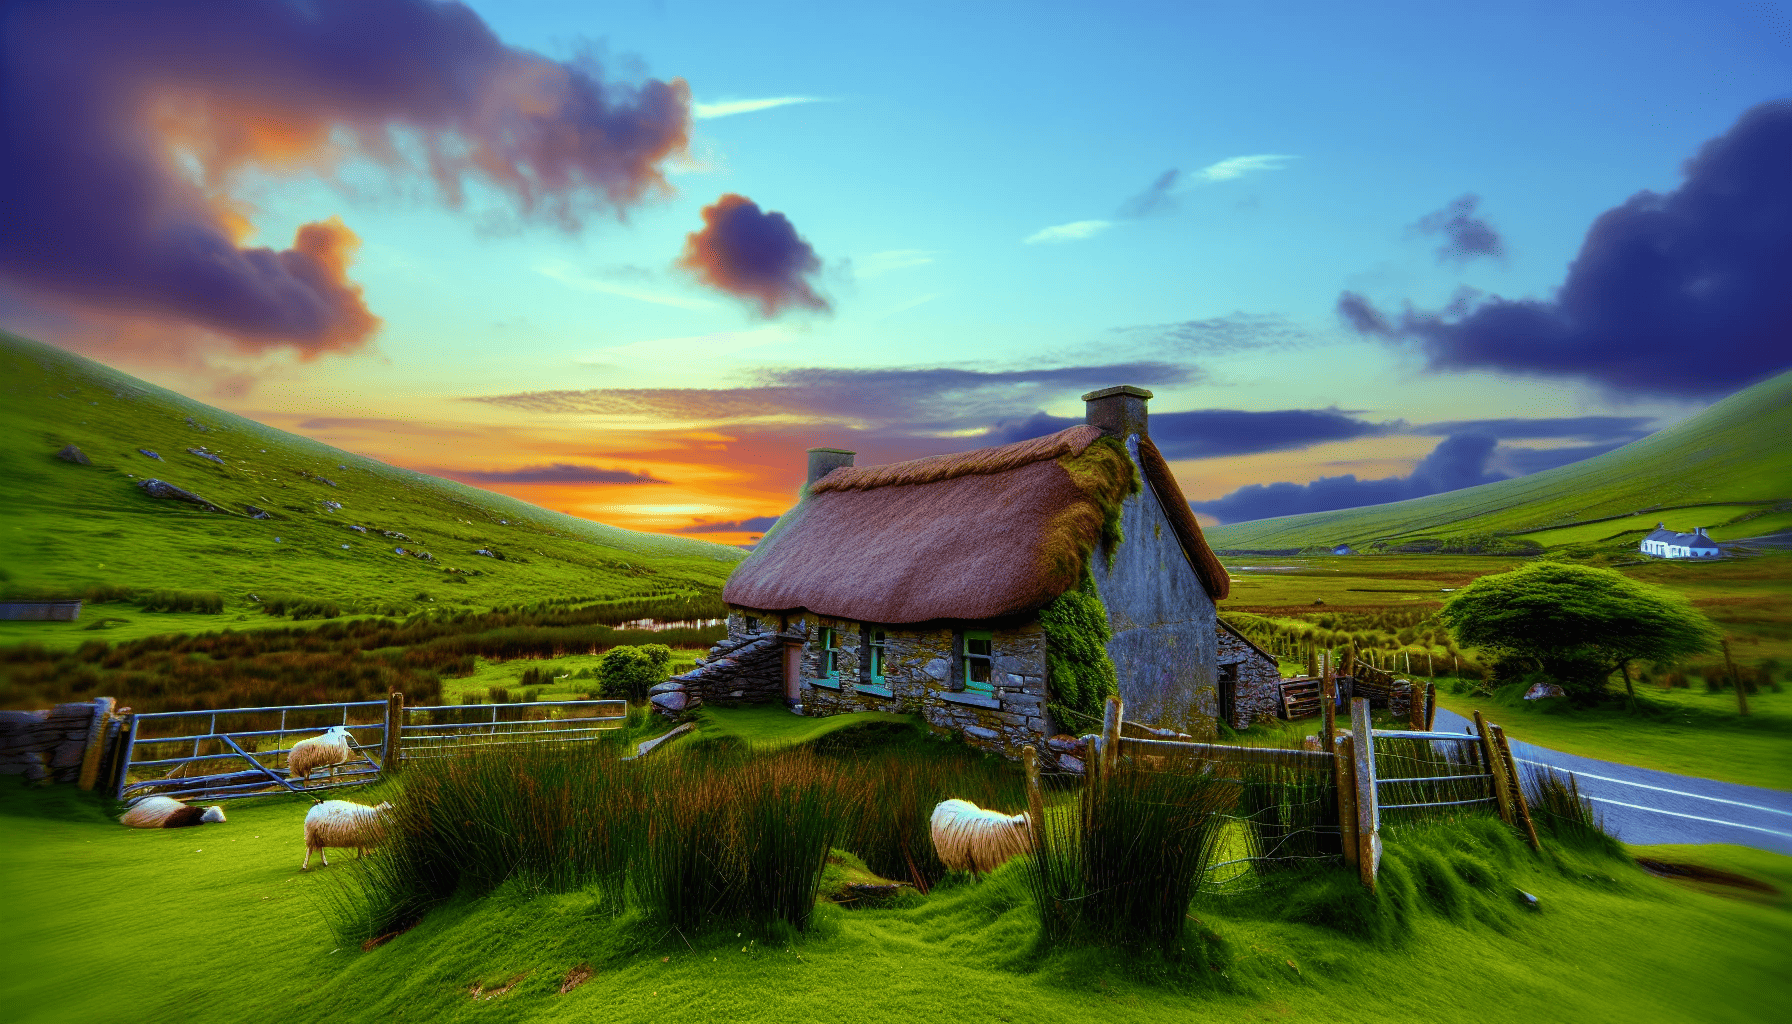 A scenic landscape of the Irish countryside with traditional cottages